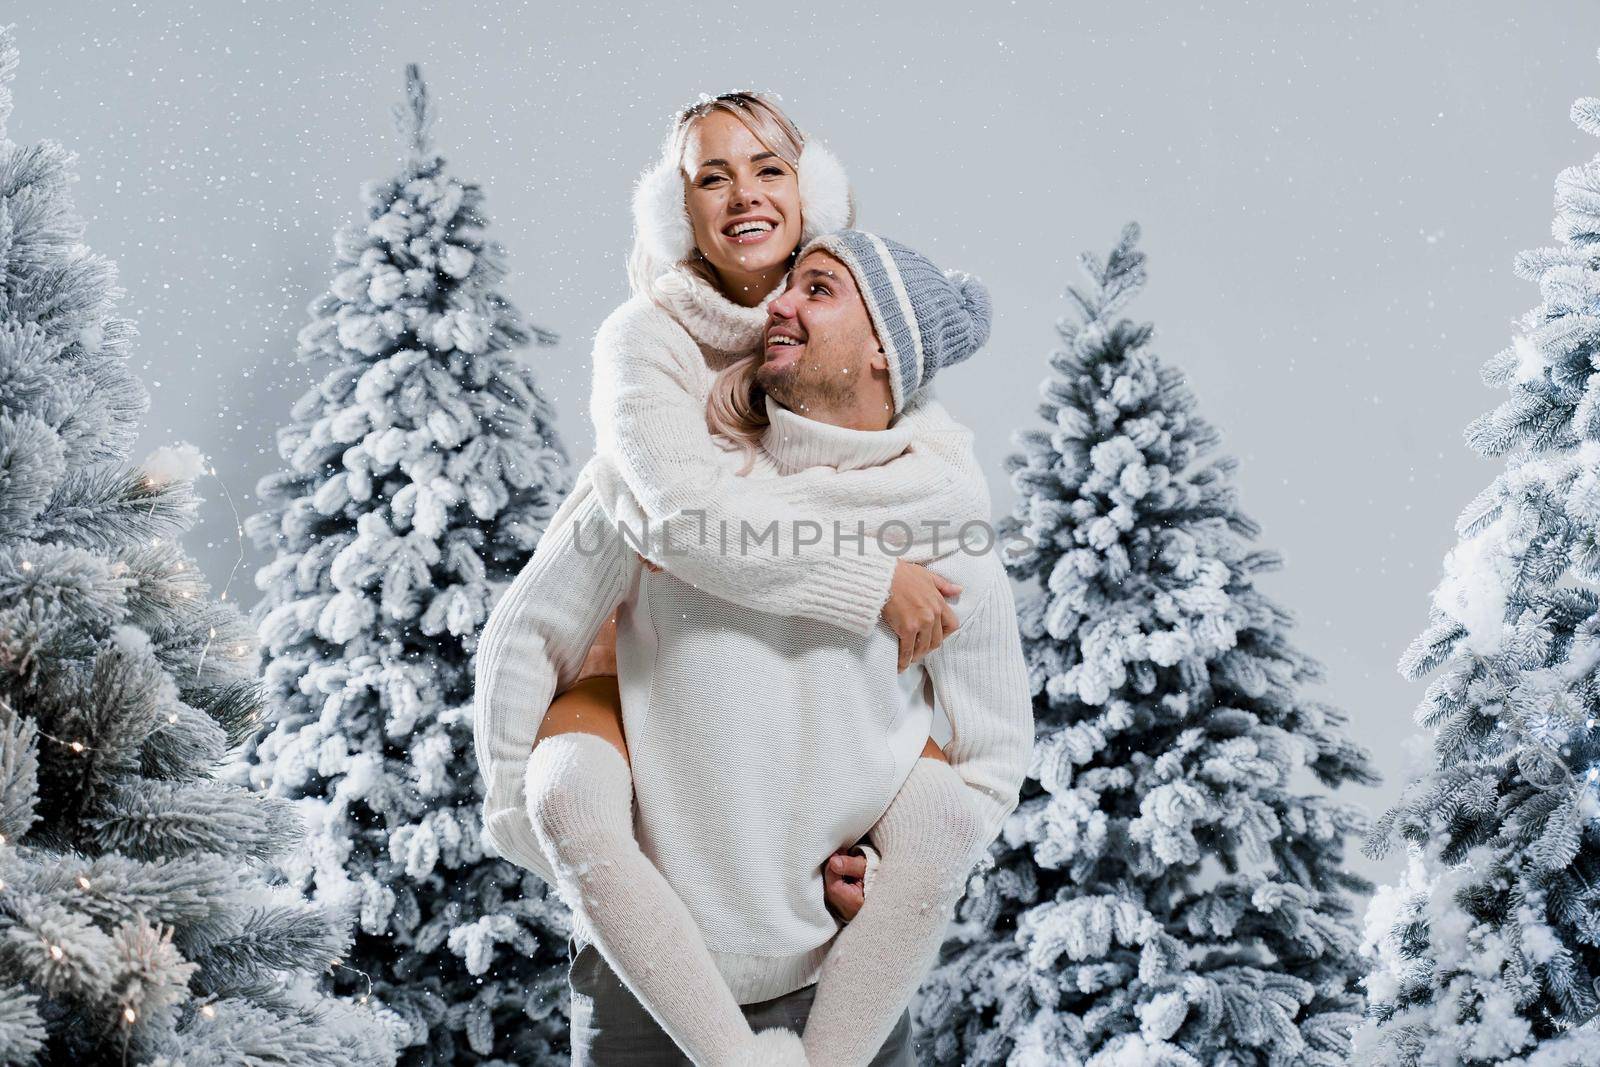 Couple kiss and hug. Man holds girl near christmas trees in winter day. New year celebration. People weared wearing fur headphones, hats, white sweaters.